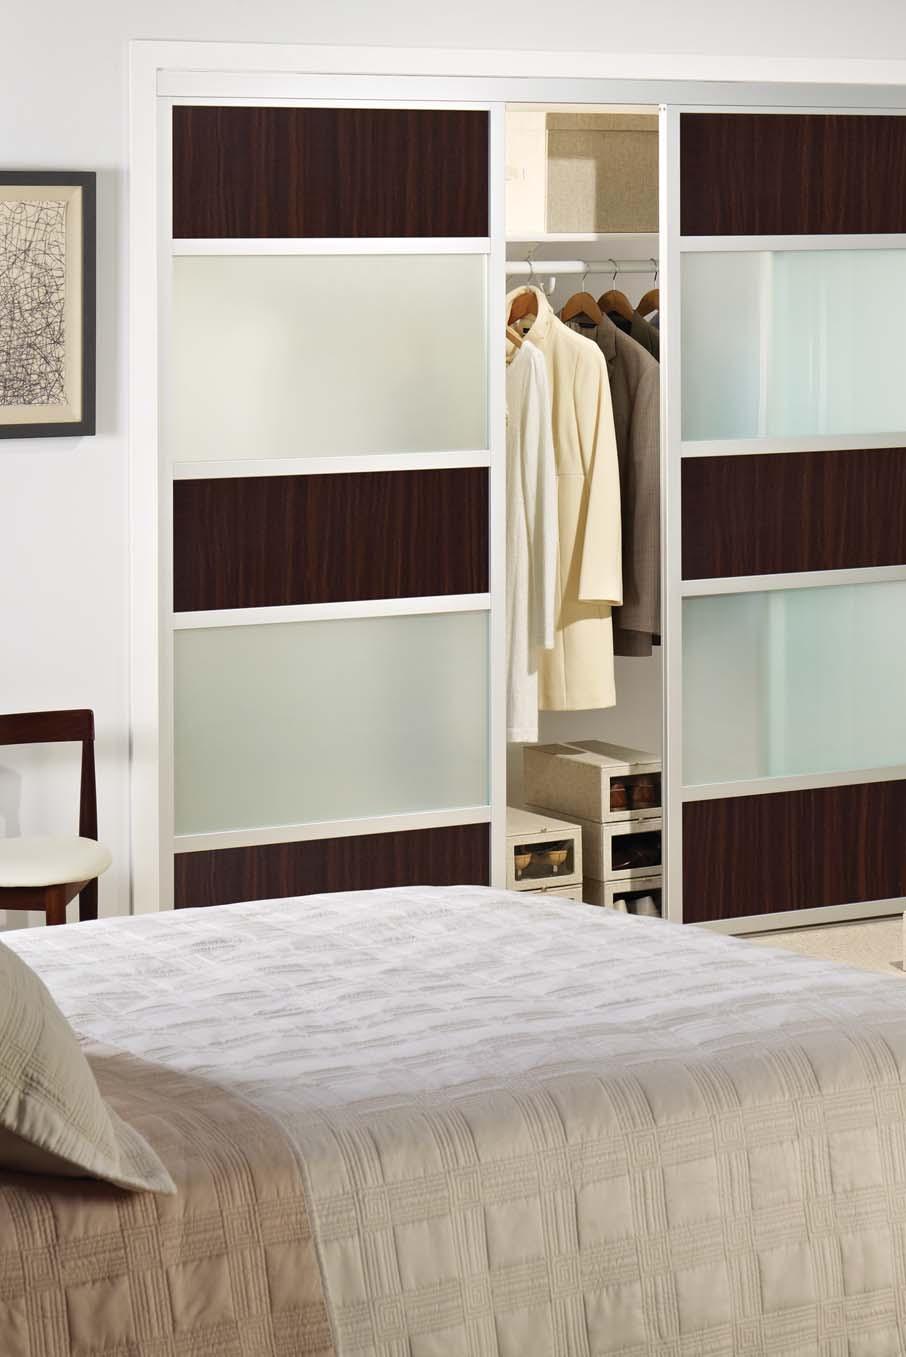 Wooded Accents Bedroom sophistication starts with sleek lines to direct